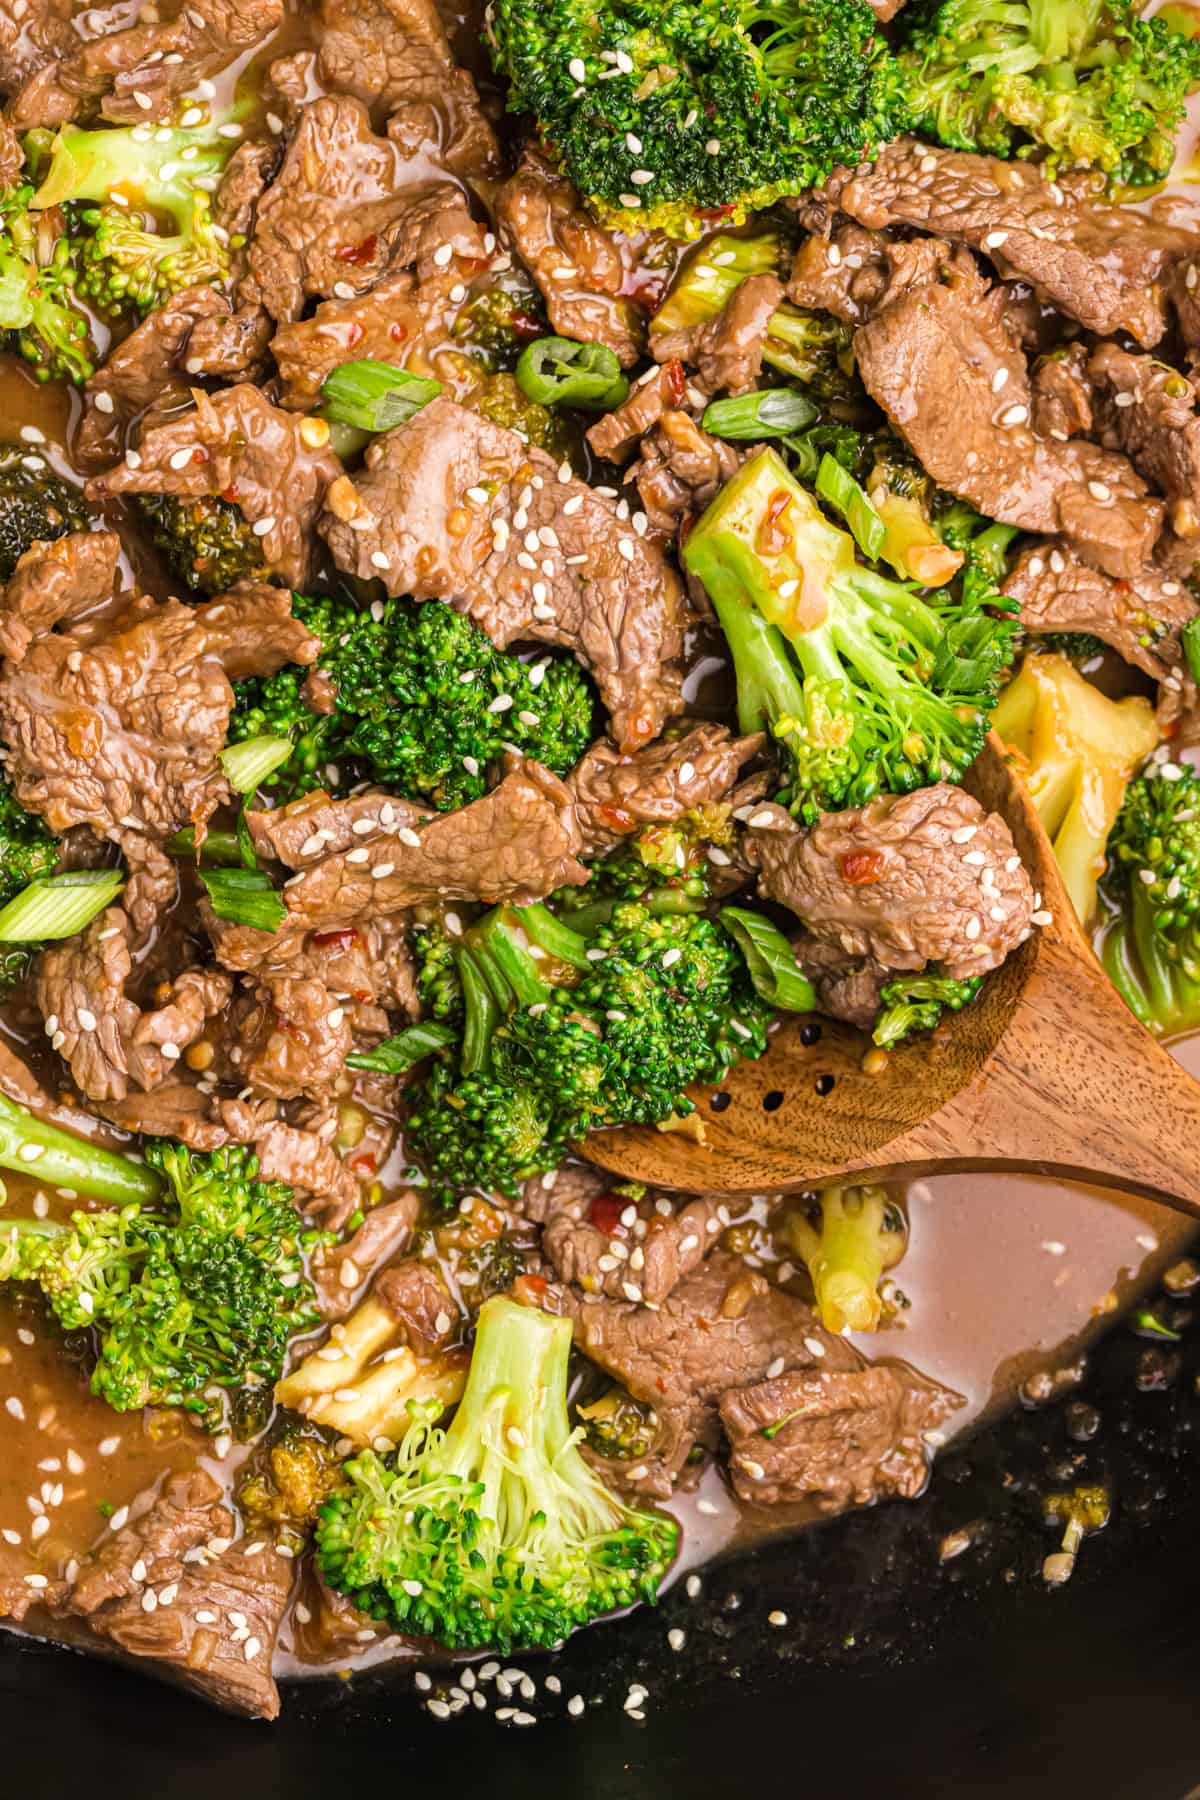 A wooden stirring spoon is placed in a skillet filled with beef and broccoli.